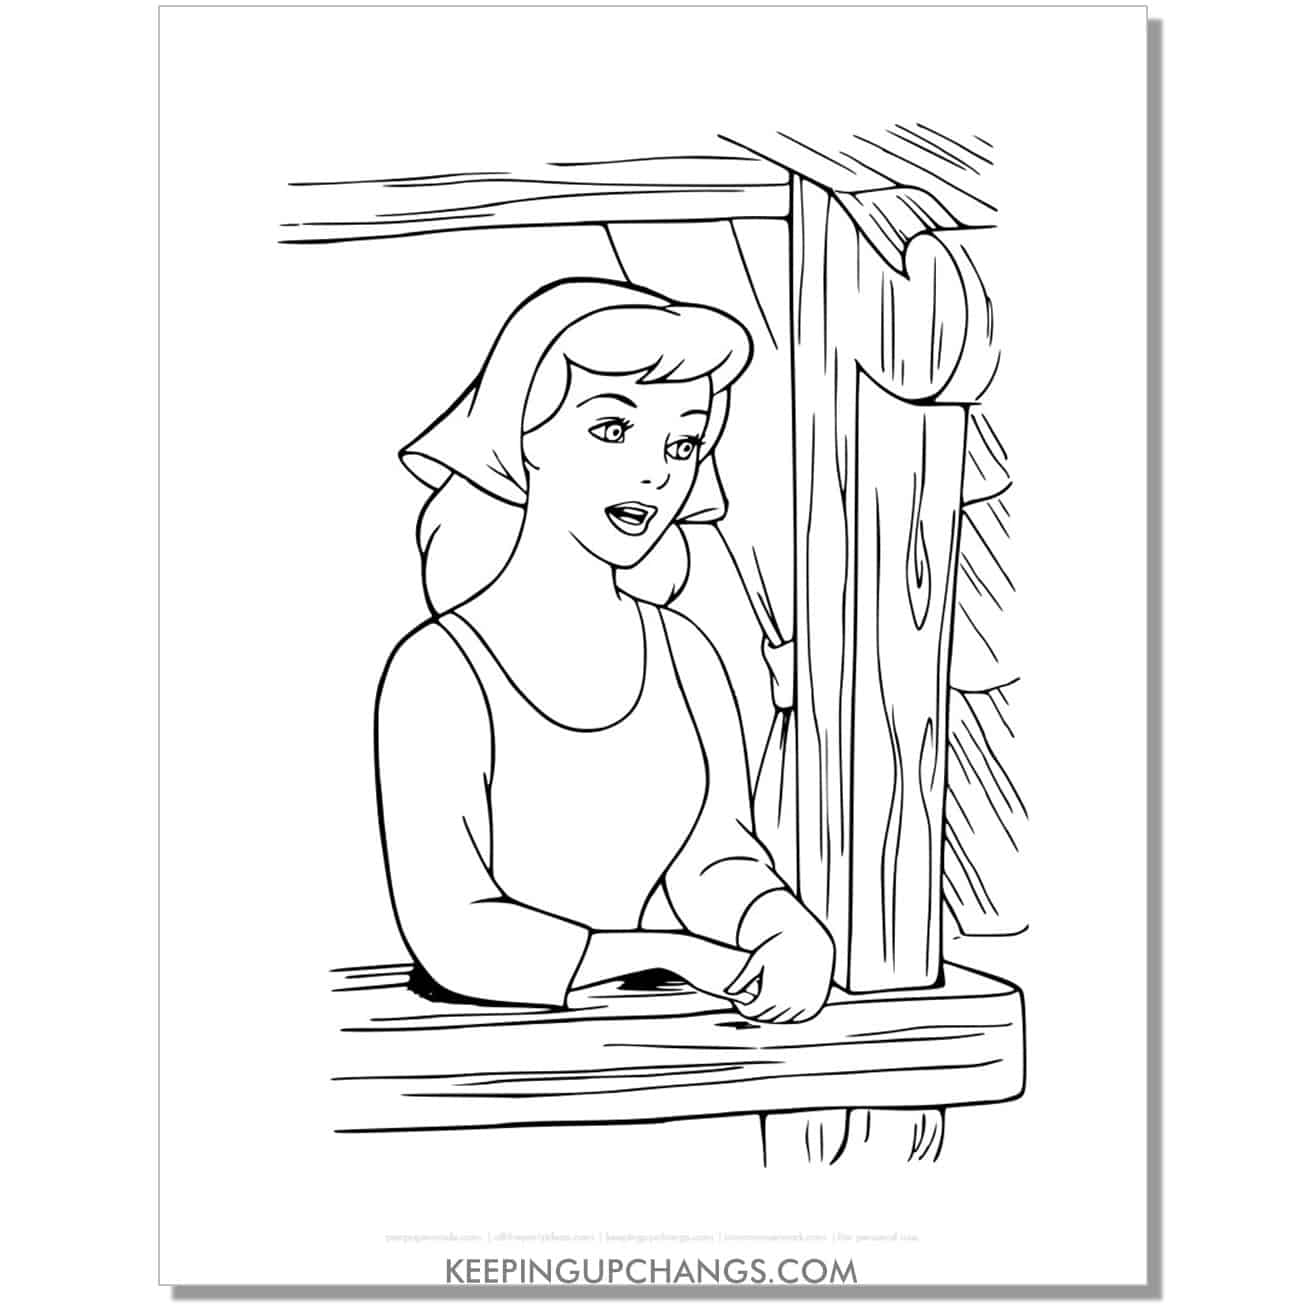 cinderella peering out window coloring page, sheet.